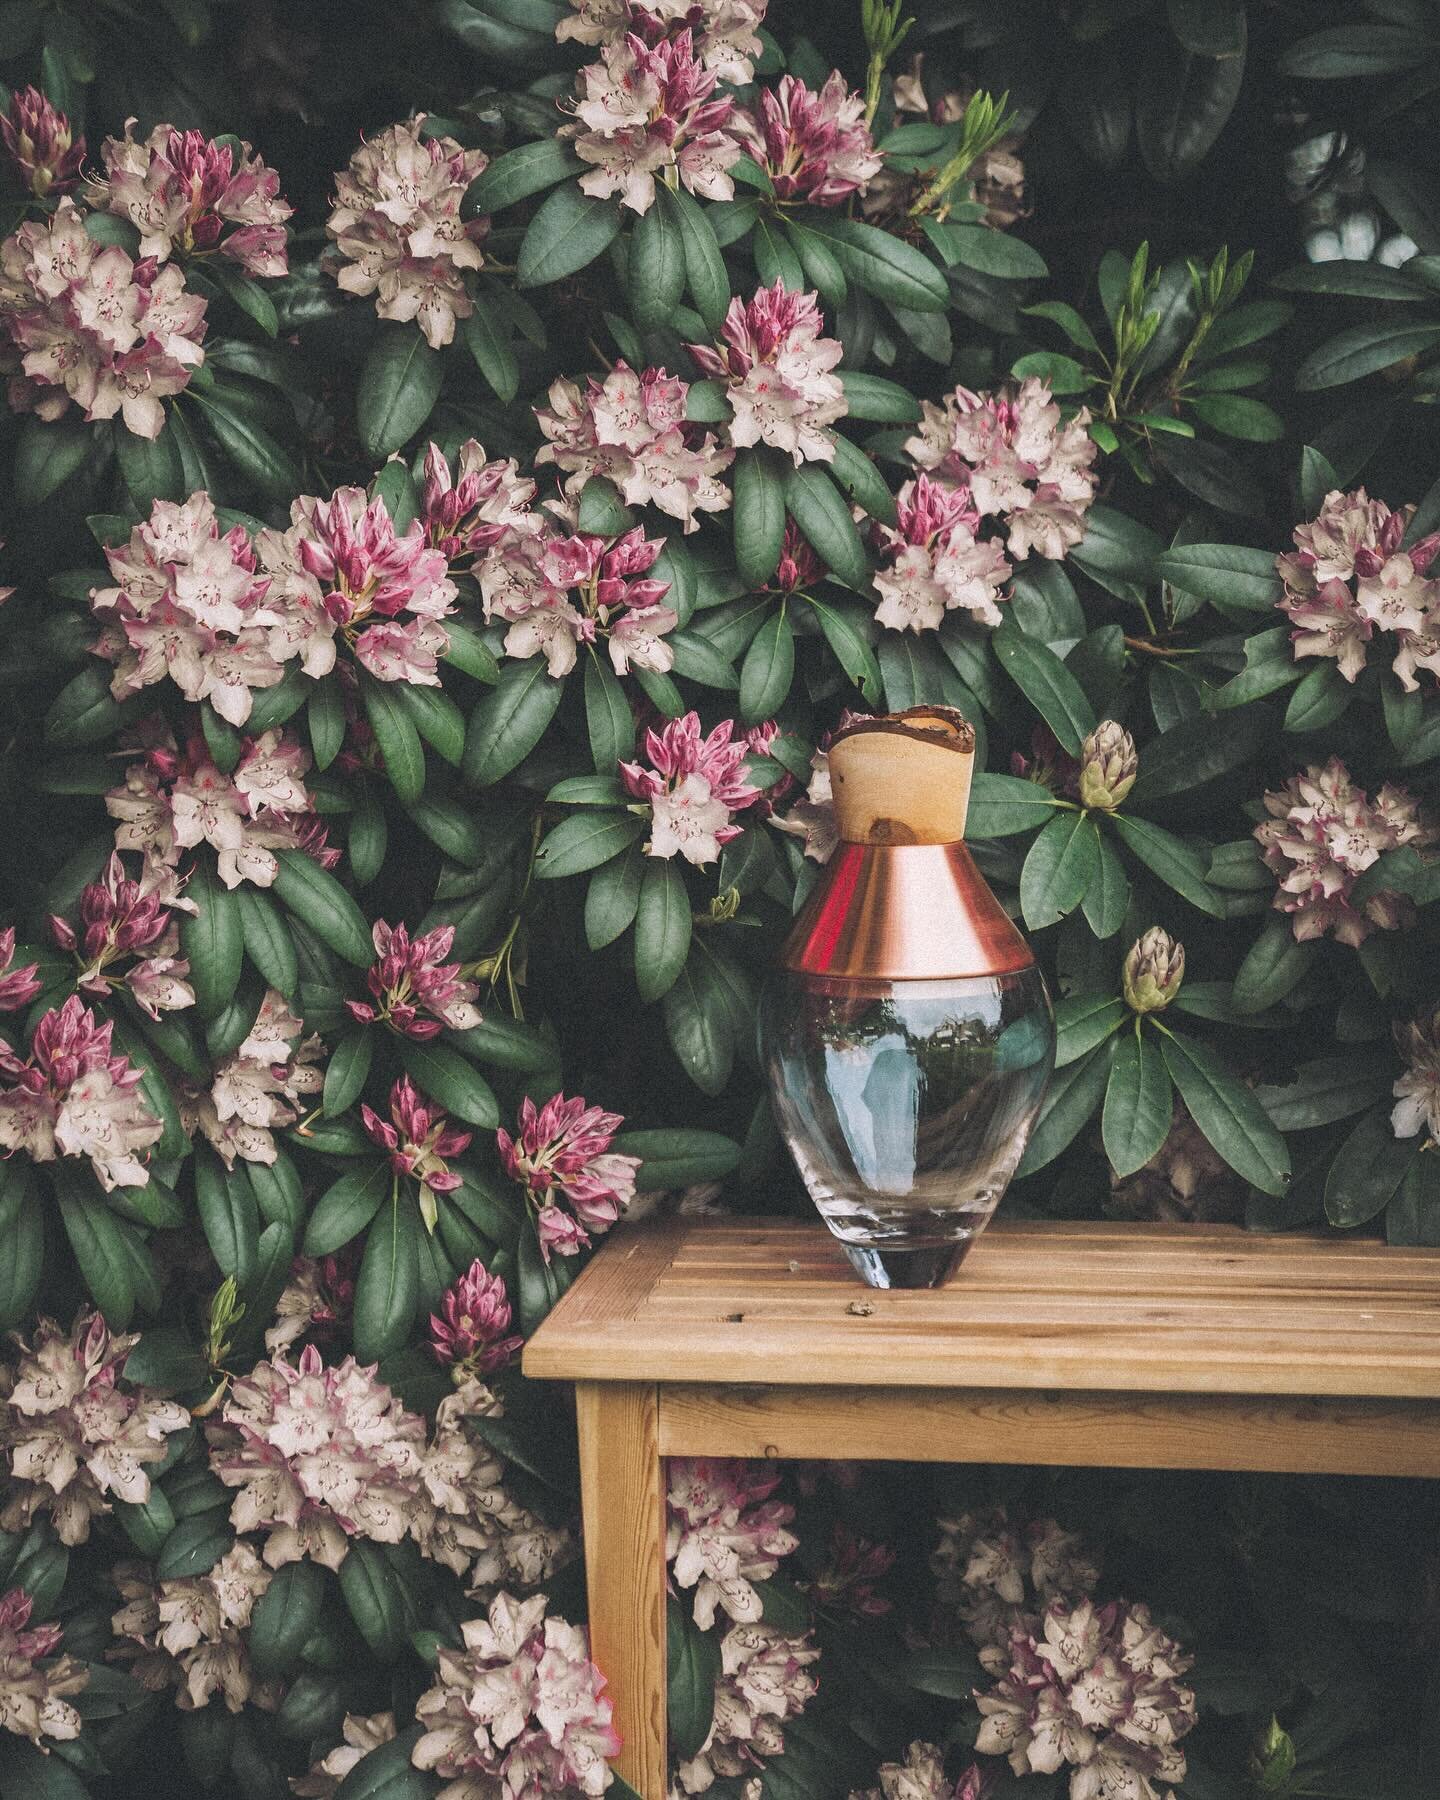 In joyful anticipation of the coming bloom , we wish you a wonderful long Easter weekend and a sunny start to April 
Feat. India Small Stacking Vessel 
.
.
.
#bloom #rhododendron #gardengoods #ethicaldesign #handmadebeauty #craftedwithcare #utopiaand